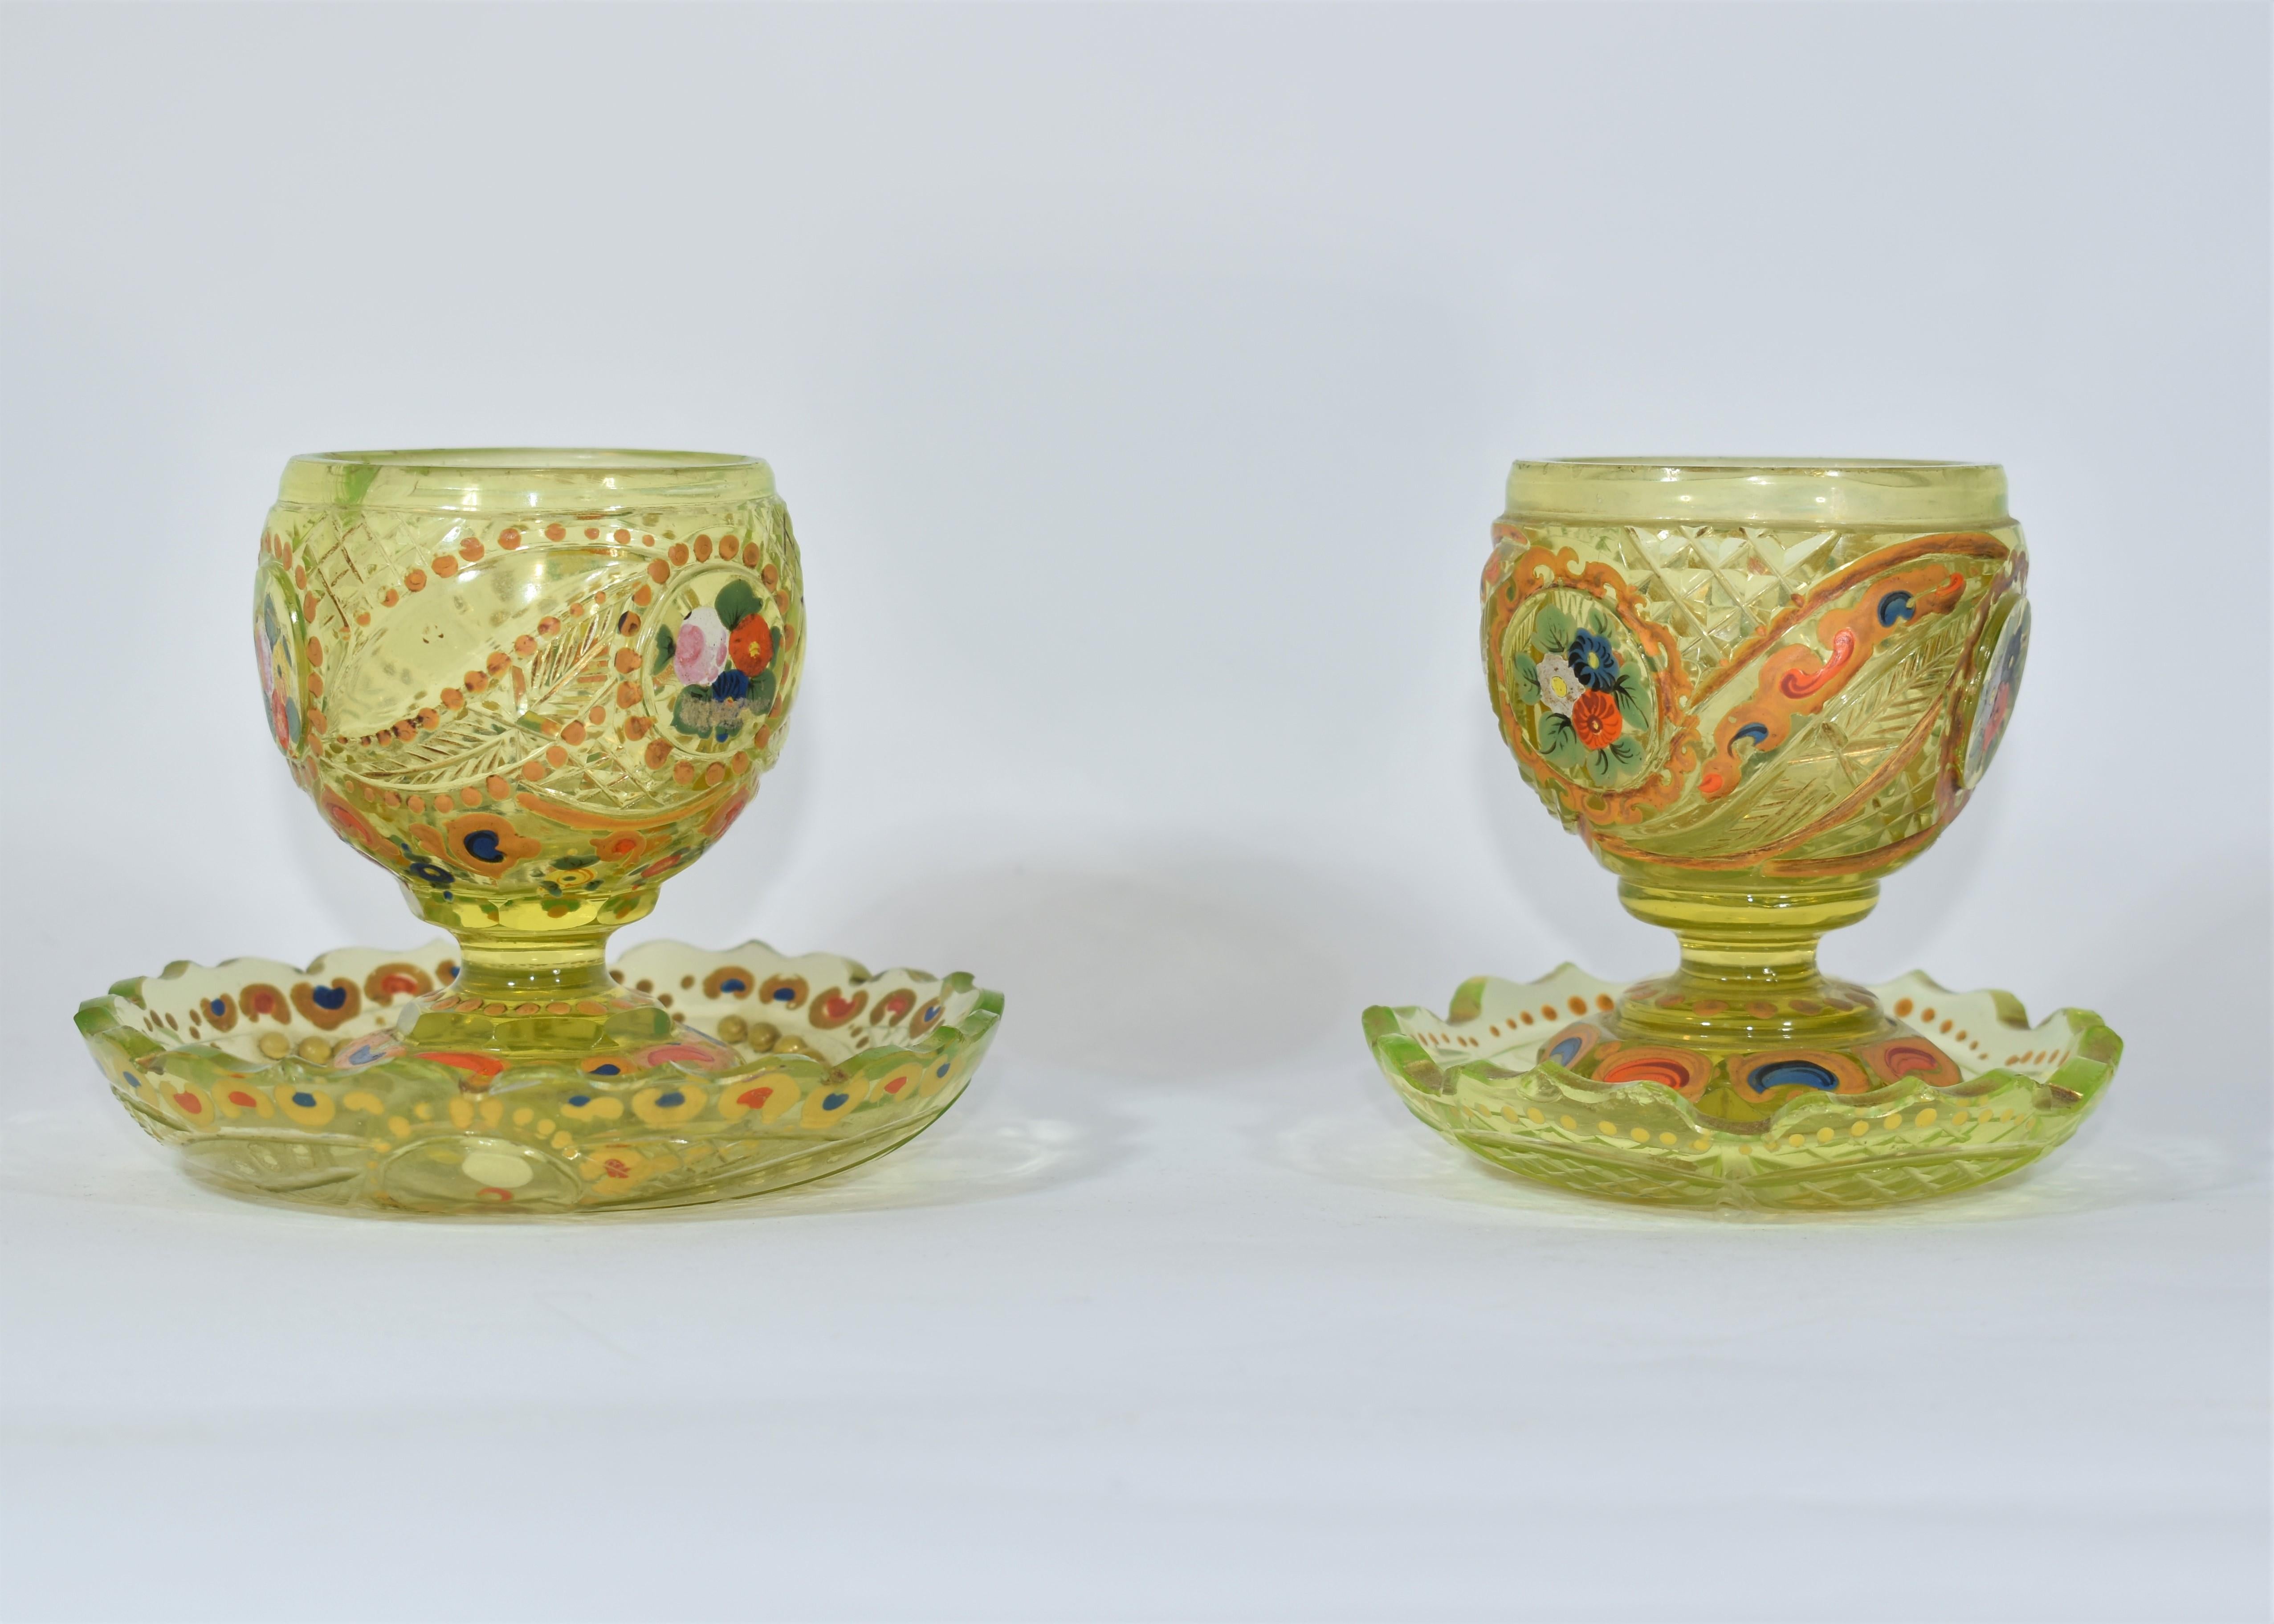 two sugar bowls with matching plates in Bohmeian enamelled uranium cut-glass
19th Century
Variously cut and richly decorated with flowers and gilded enamel.
Made by Bohemin glass manufacturers for the Islamic (Ottoman or Persian) market.